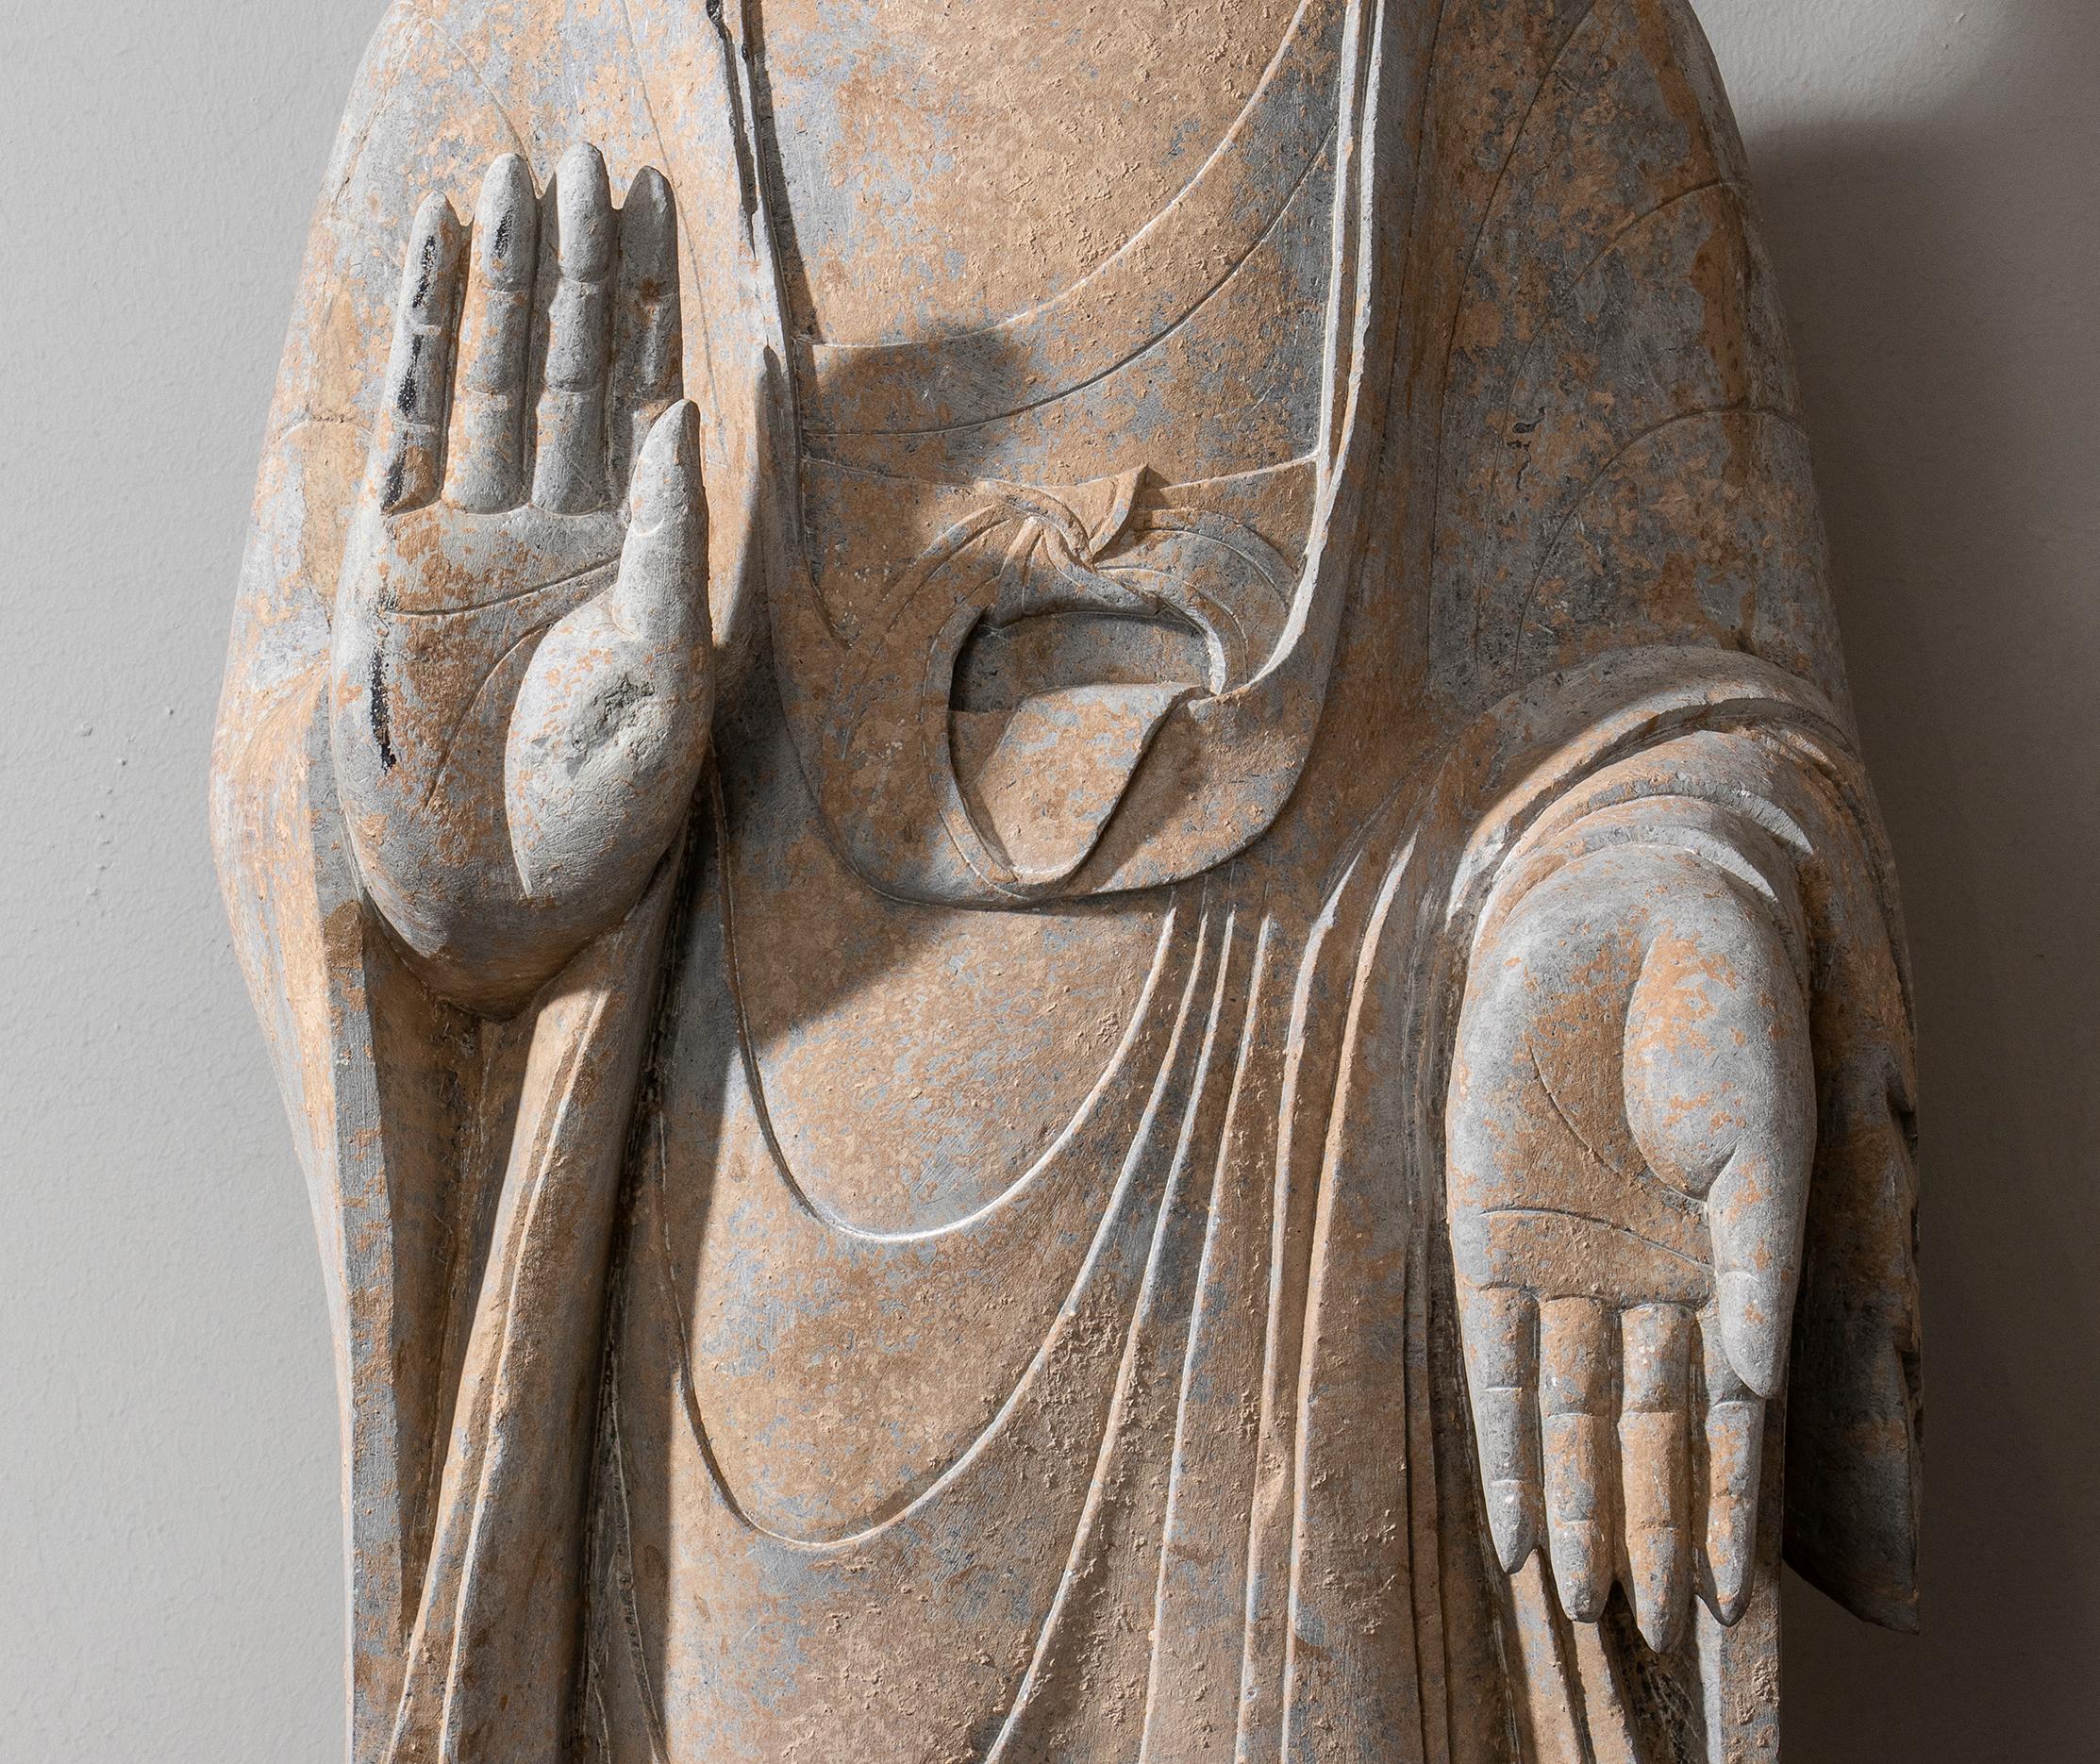 Stone Sculpture of Buddha in the style of the Tang And Wei Dynasties - Gray Figurative Sculpture by Unknown